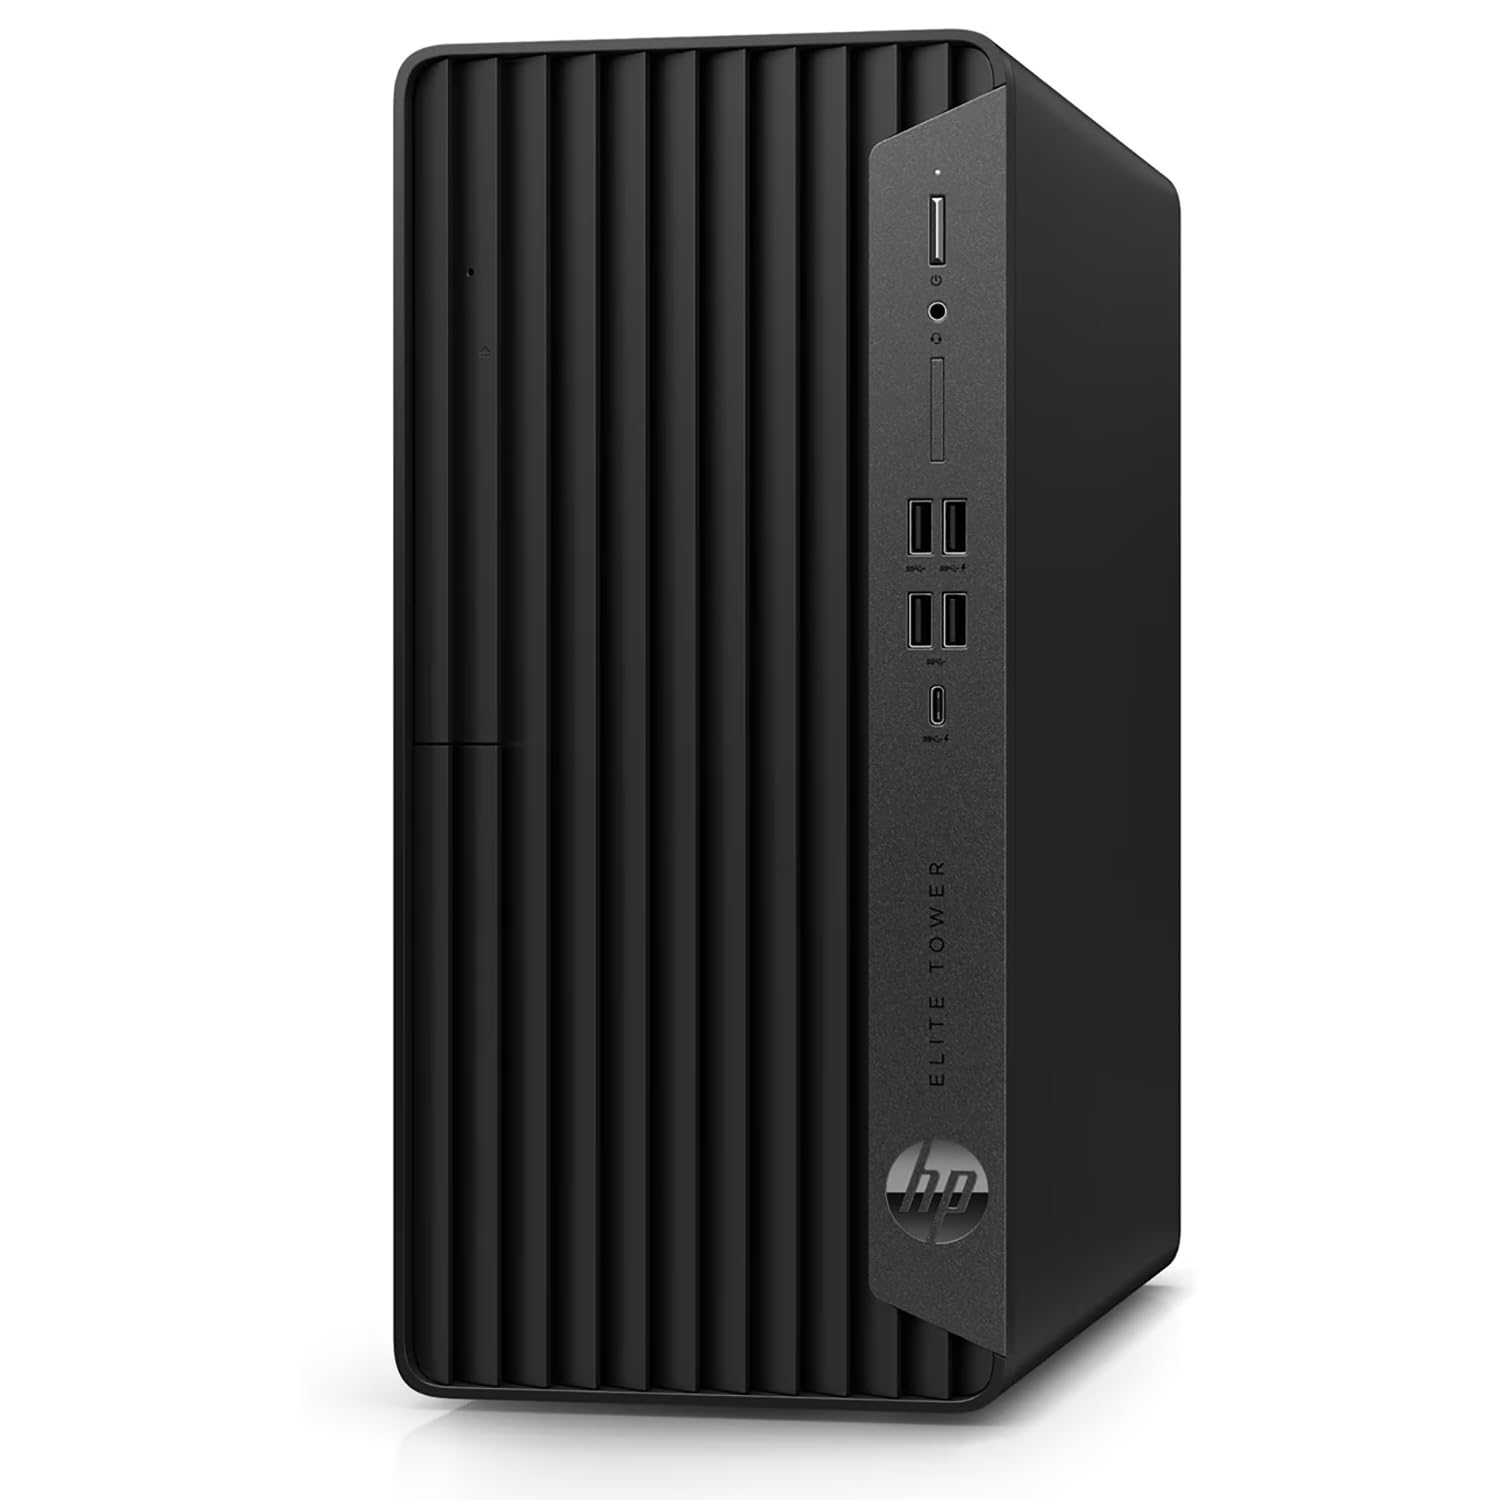 HP Elite Tower 800 Series 880 G9 Business Desktop Computer, 12th Gen Intel 12-Core i7-12700, 16GB DDR5 RAM, 512GB PCIe SSD, DVDRW, WiFi 6, Bluetooth, Keyboard and Mouse, Windows 11 Pro, BROAG Cable